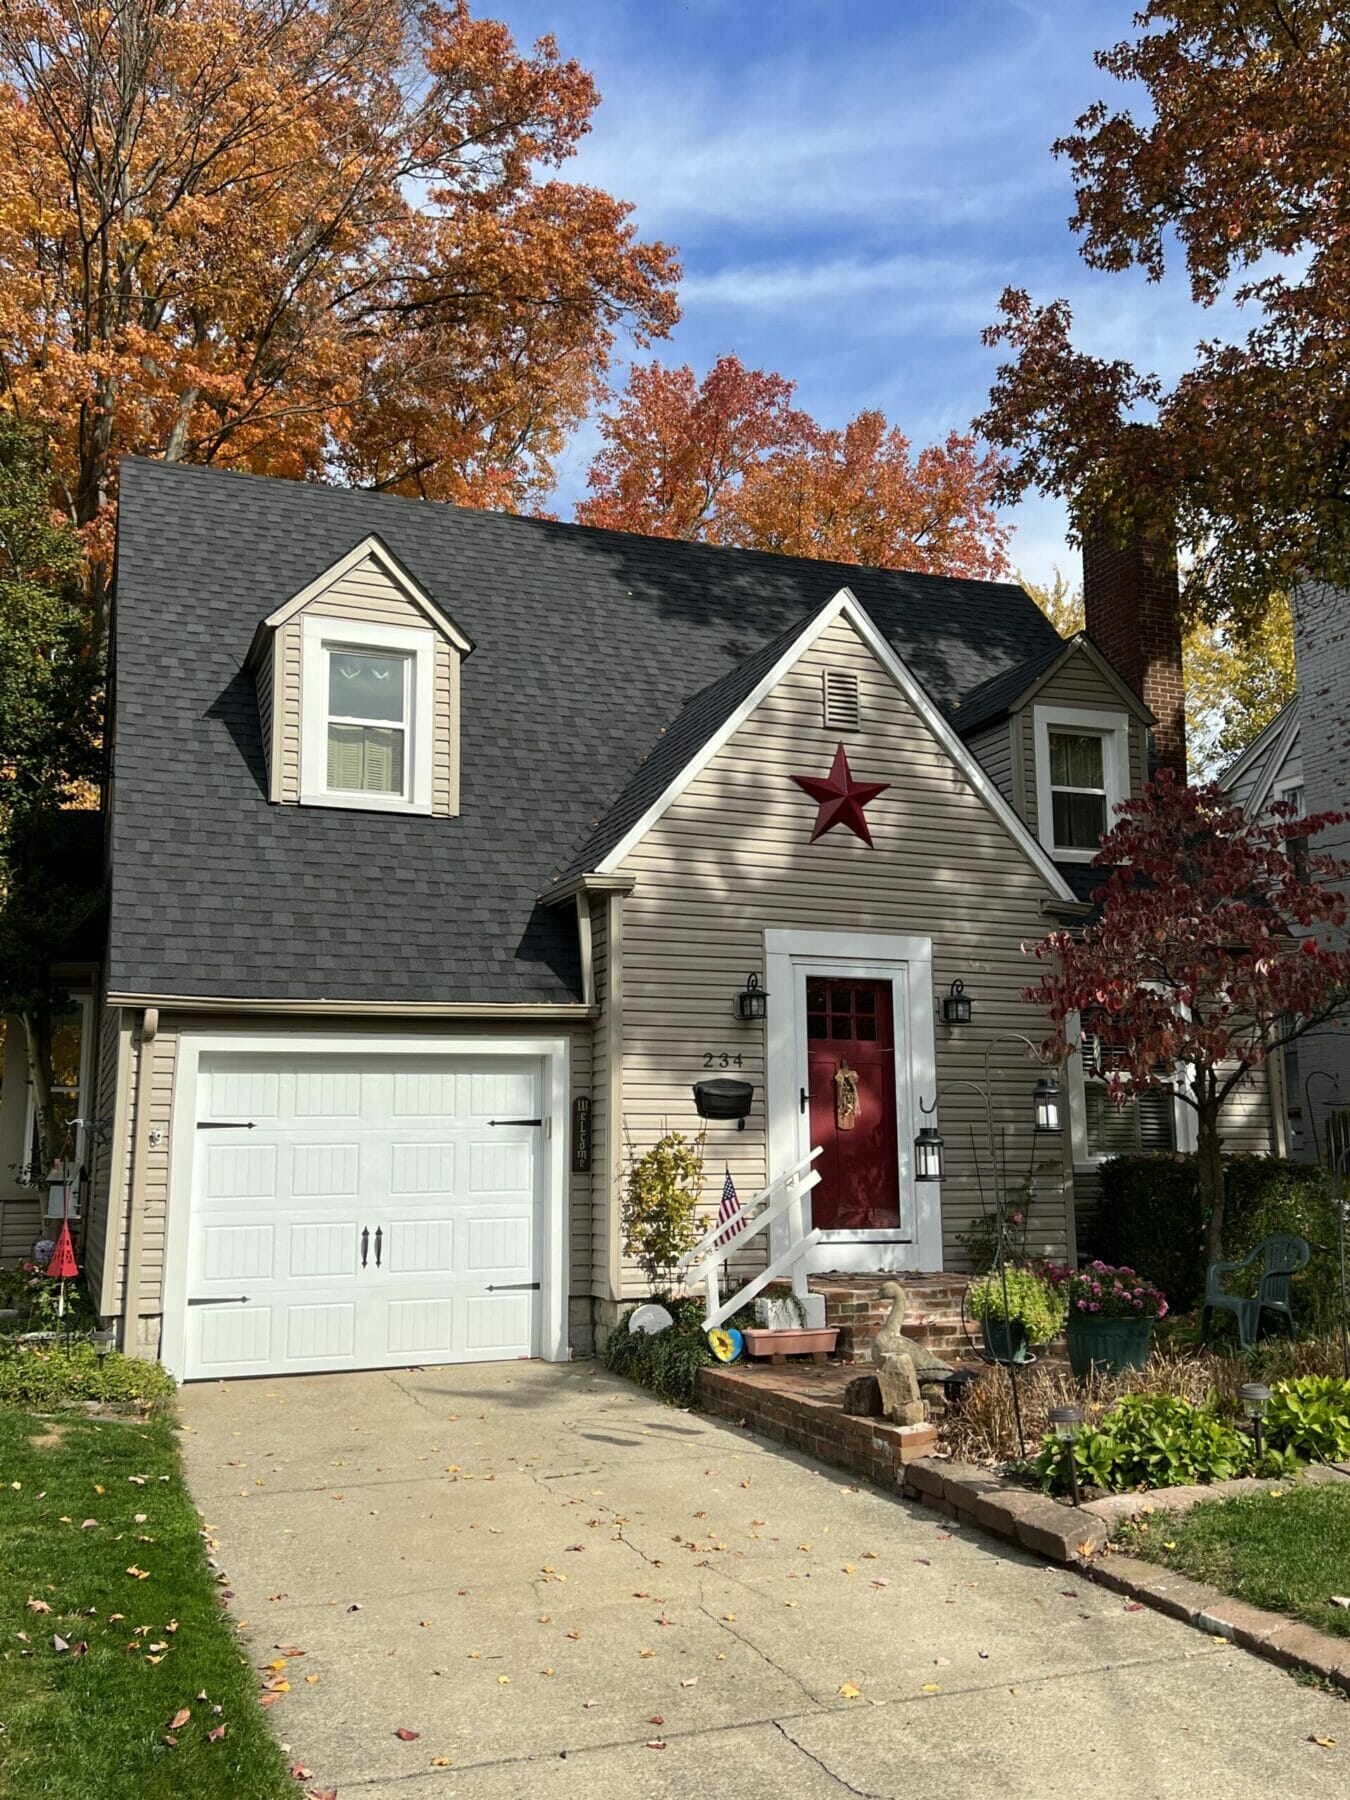 New steep roof on home with red door